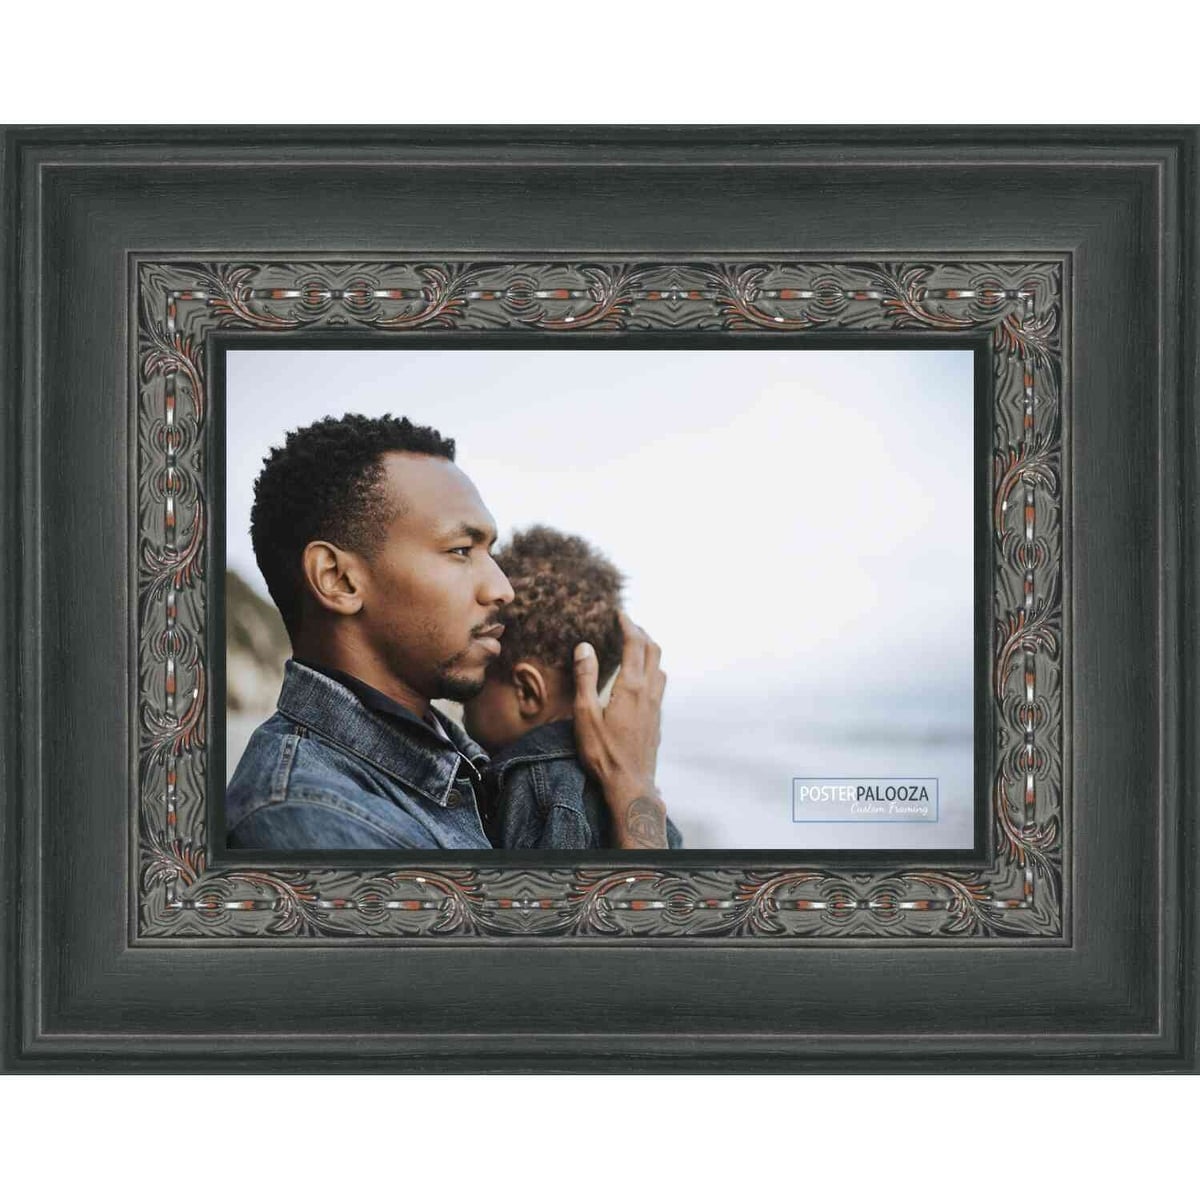 https://ak1.ostkcdn.com/images/products/is/images/direct/92cb97d6cbbe5f09557f04f635c96fc169eba6a5/6x10-Distressed-Aged-Black-Complete-Wood-Picture-Frame-with-UV-Acrylic%2C-Foam-Board-Backing%2C-%26-Hardware.jpg